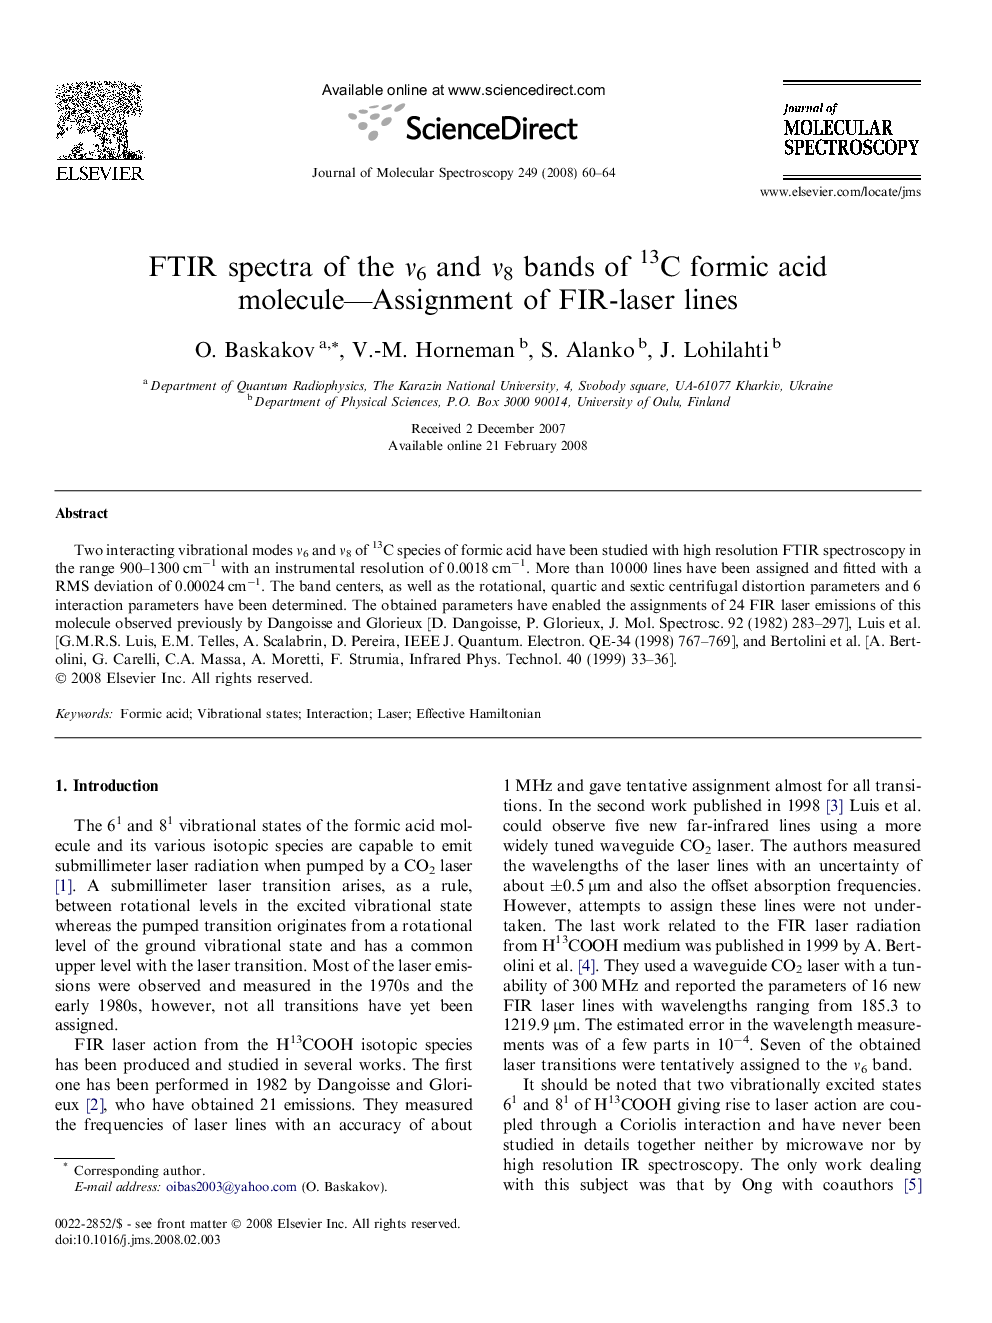 FTIR spectra of the Î½6 and Î½8 bands of 13C formic acid molecule-Assignment of FIR-laser lines